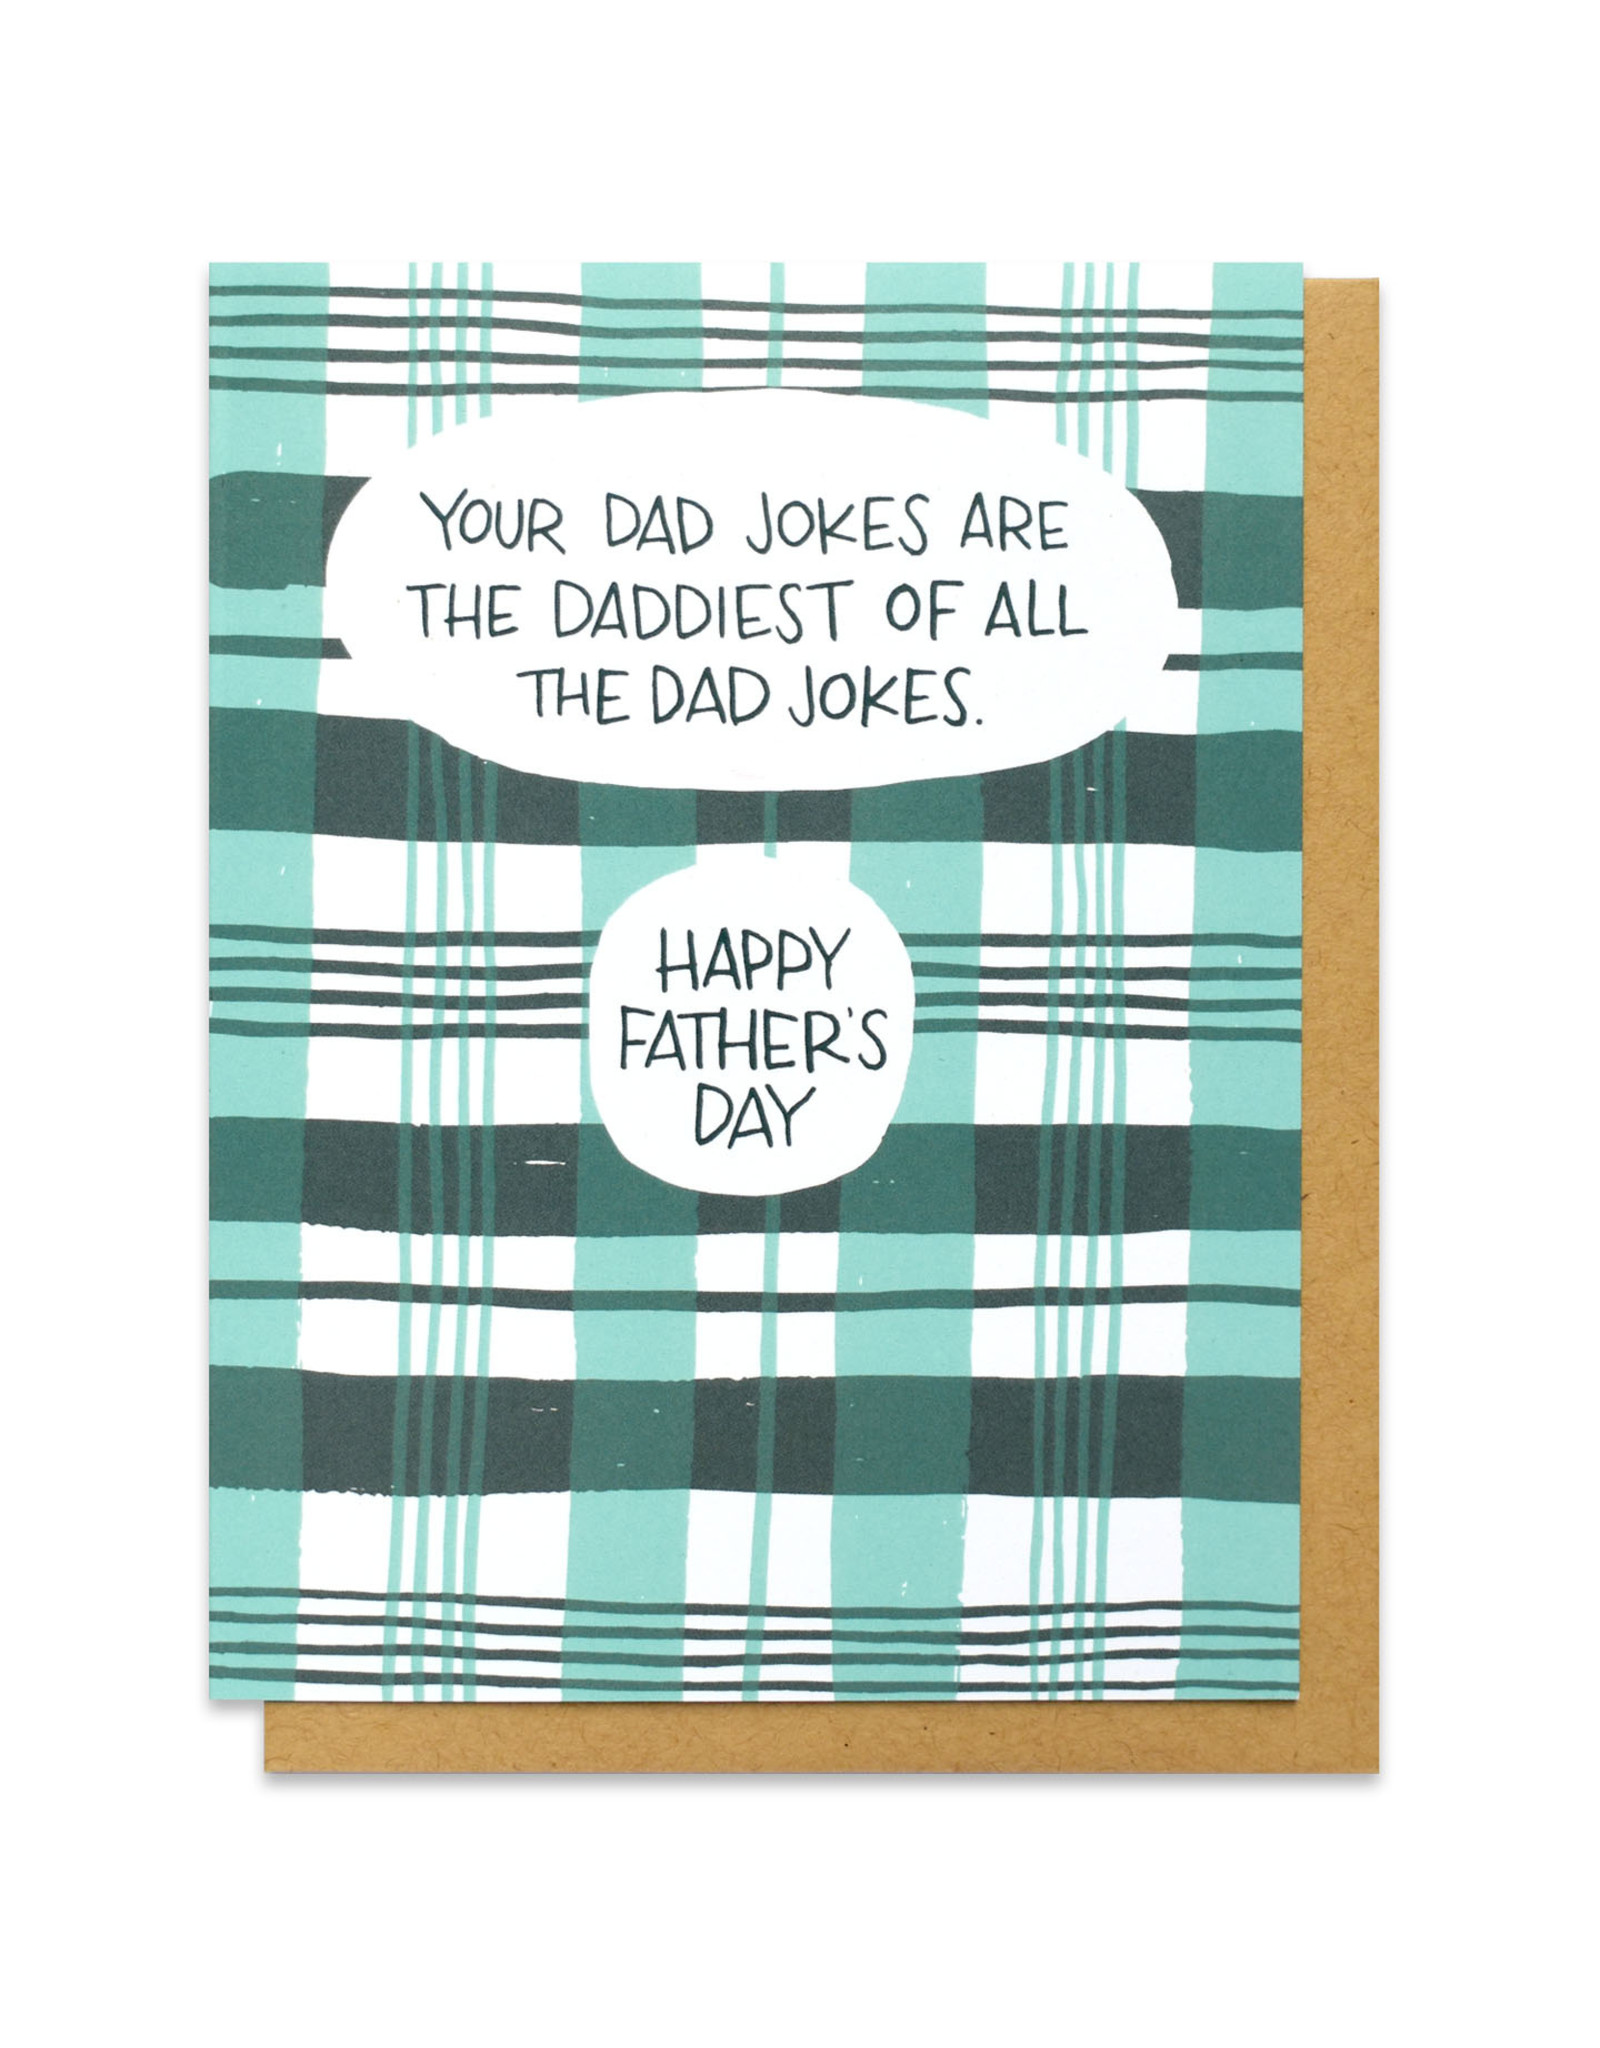 Happy Father's Day Dad Jokes Greeting Card